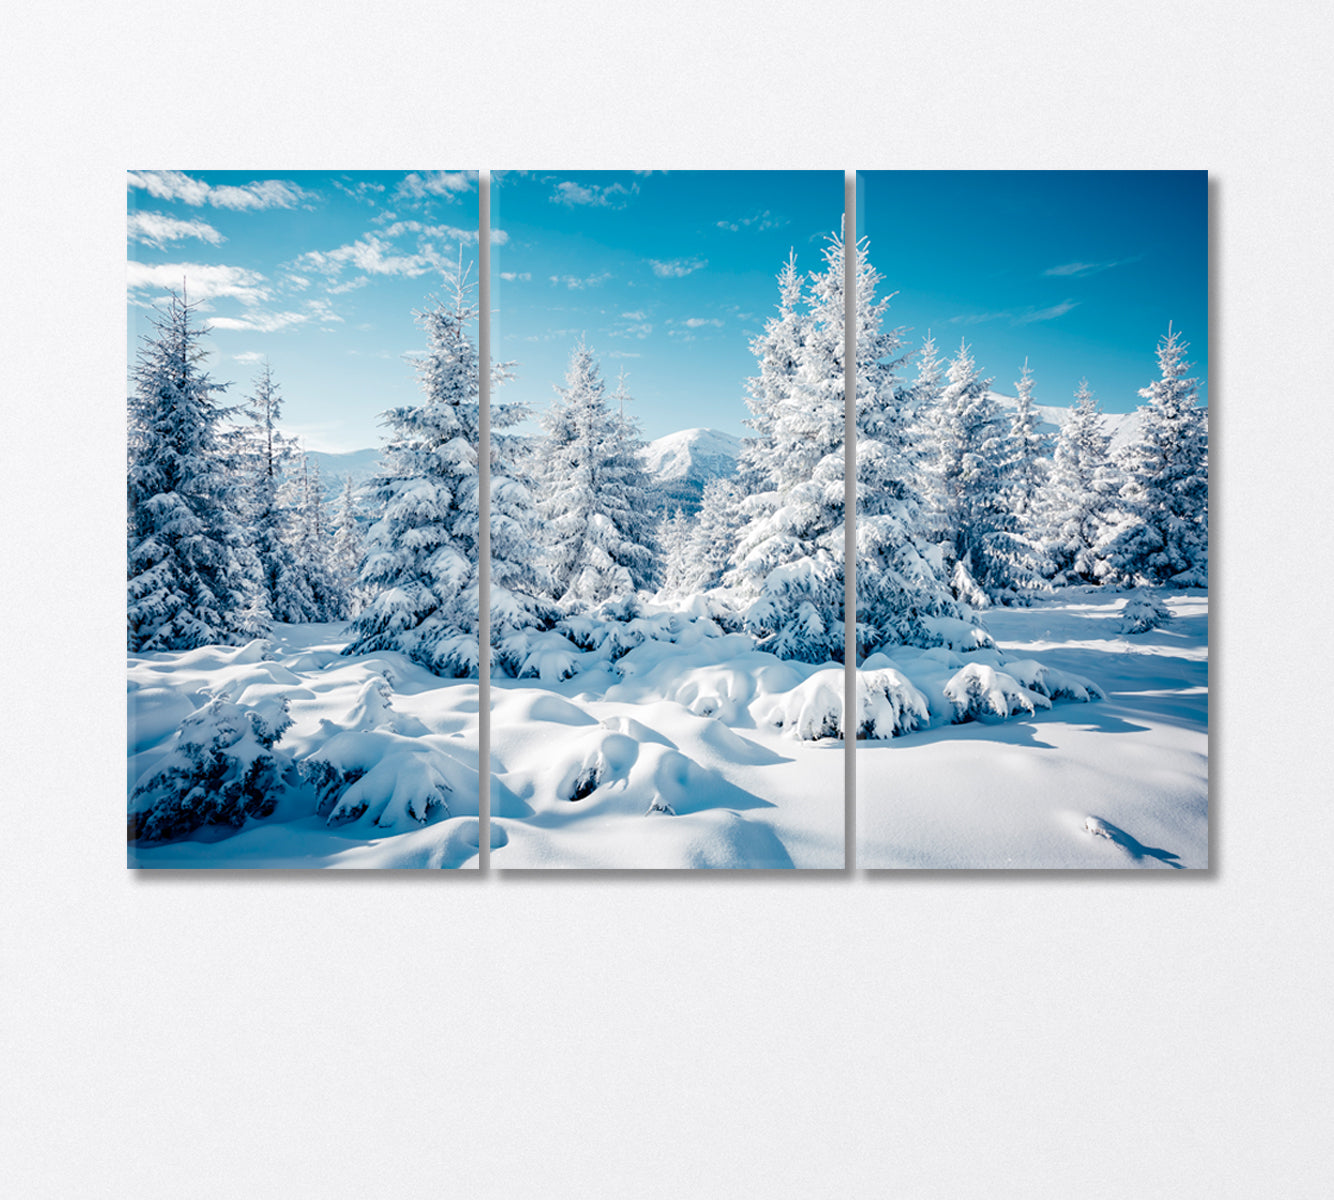 Snowy Spruce Forest in the Mountains Canvas Print-Canvas Print-CetArt-3 Panels-36x24 inches-CetArt